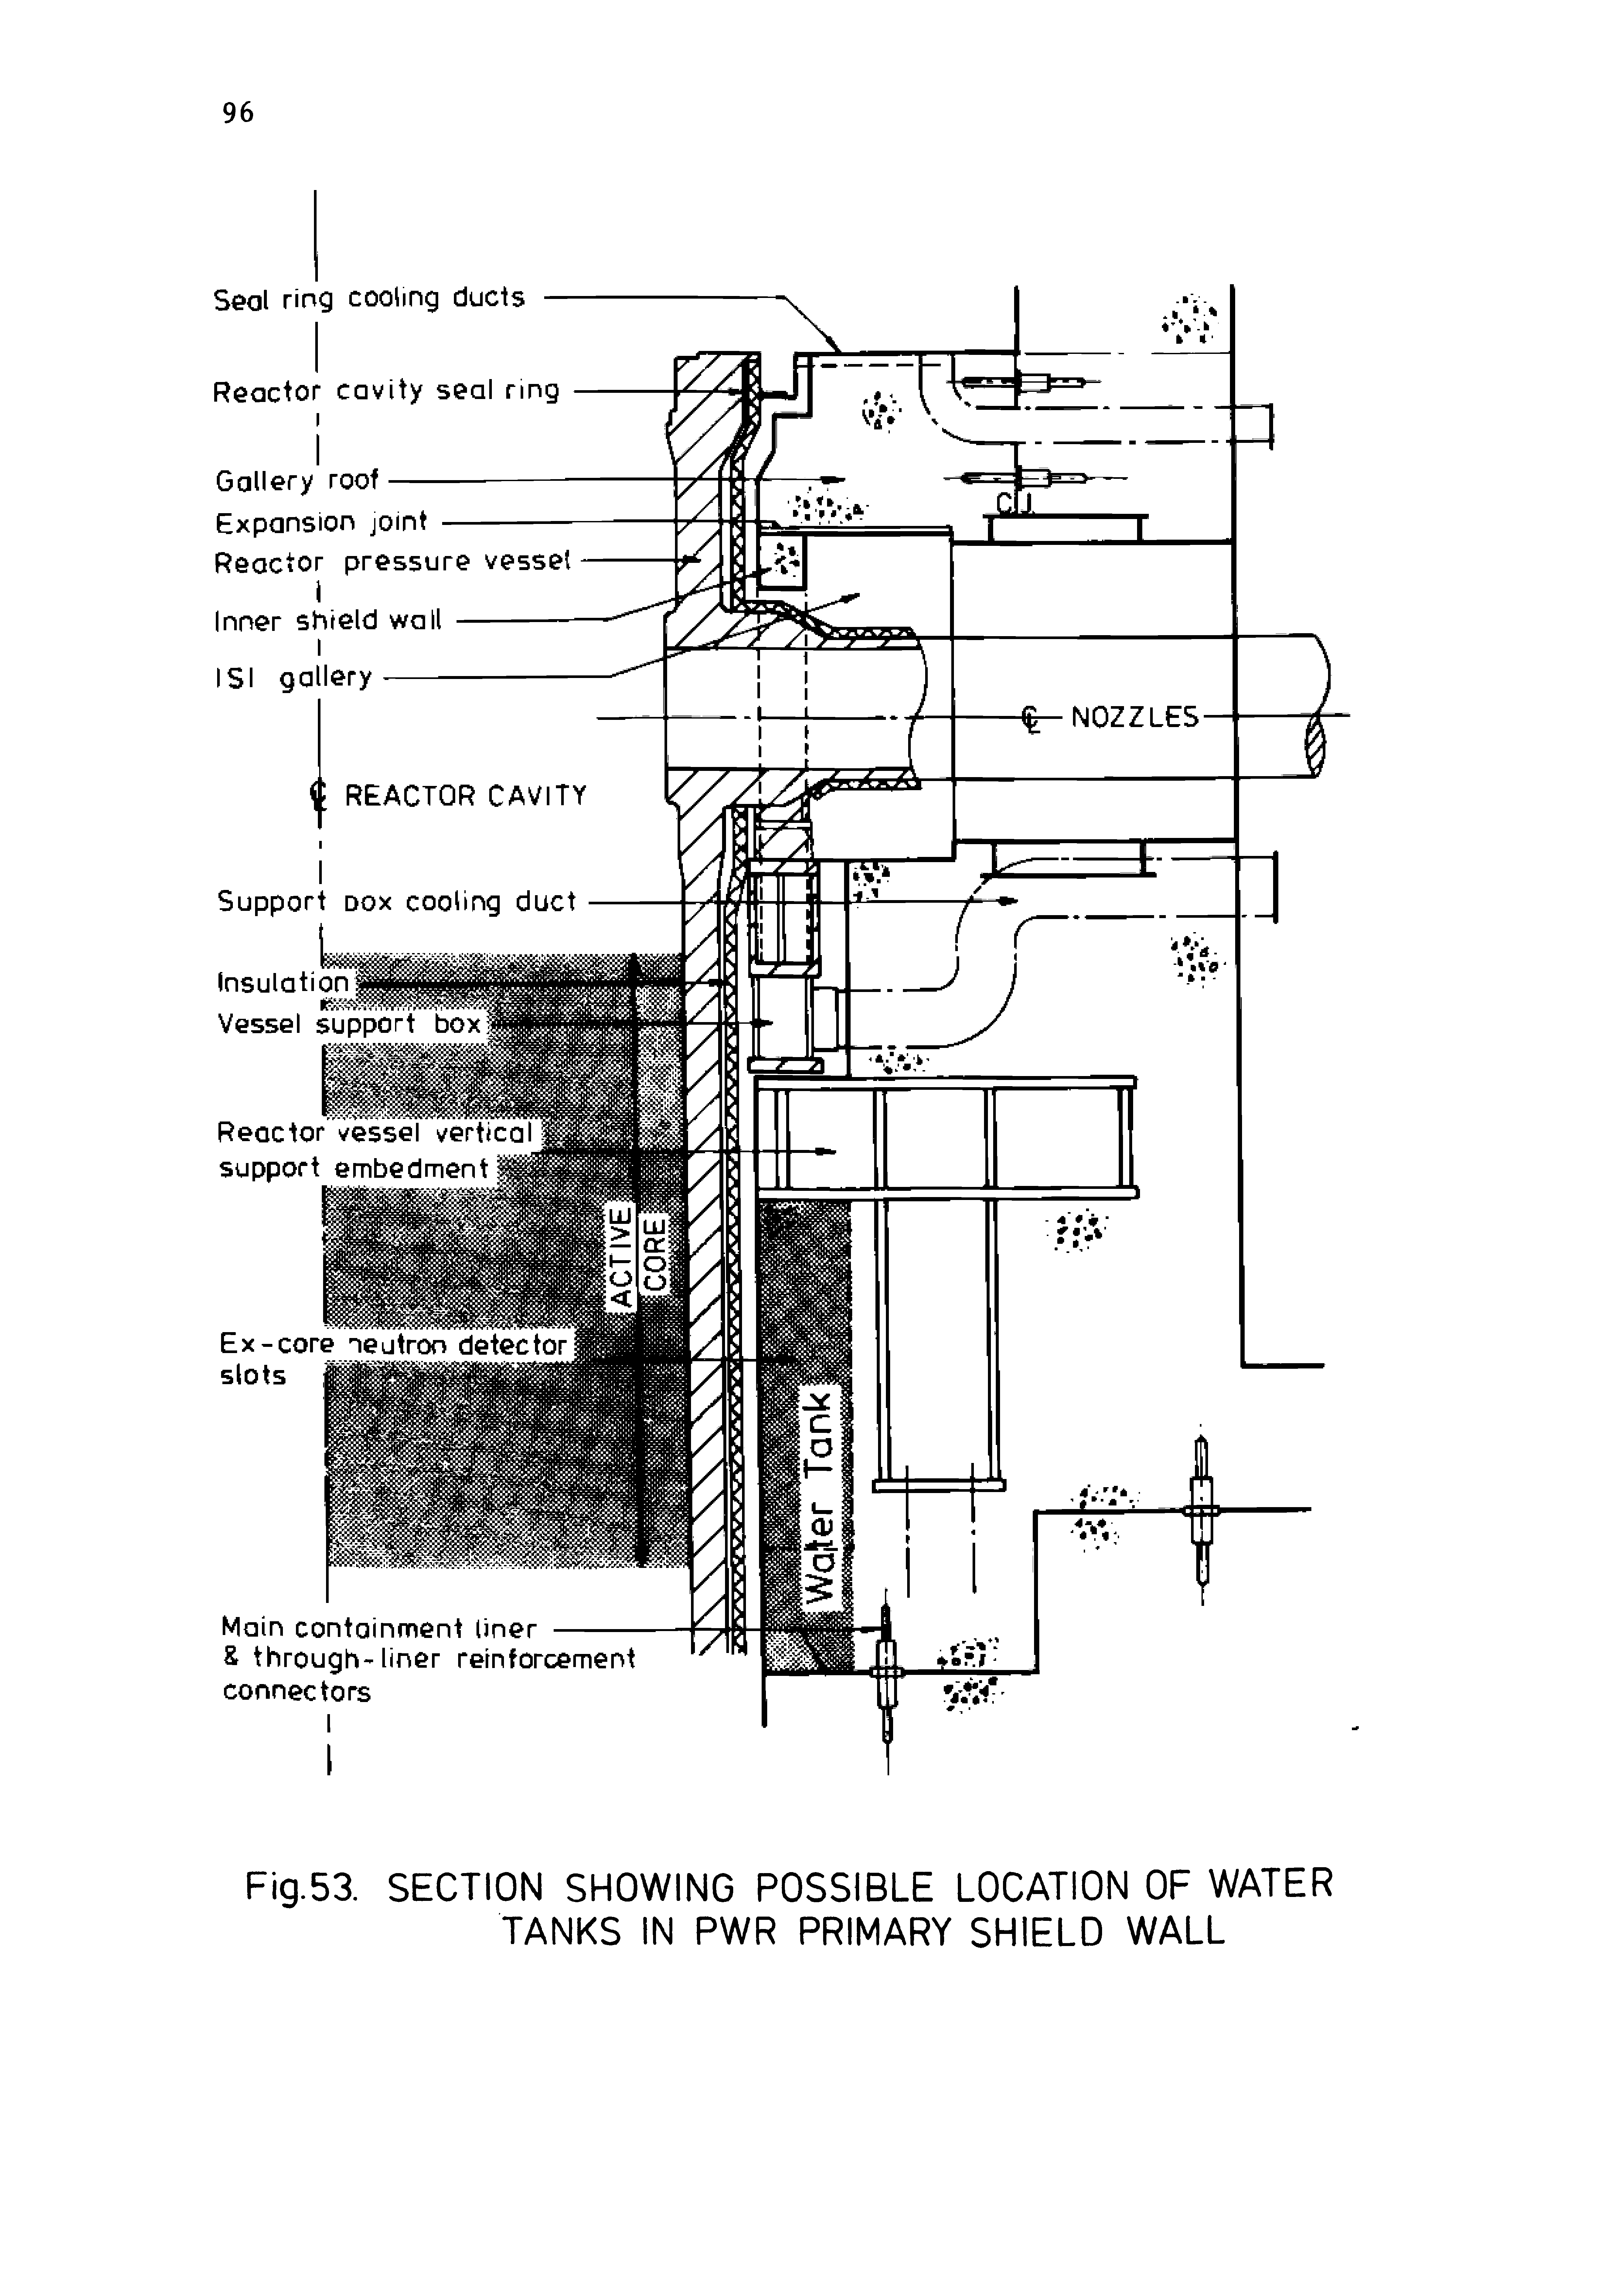 Fig.53. SECTION SHOWING POSSIBLE LOCATION OF WATER TANKS IN PWR PRIMARY SHIELD WALL...